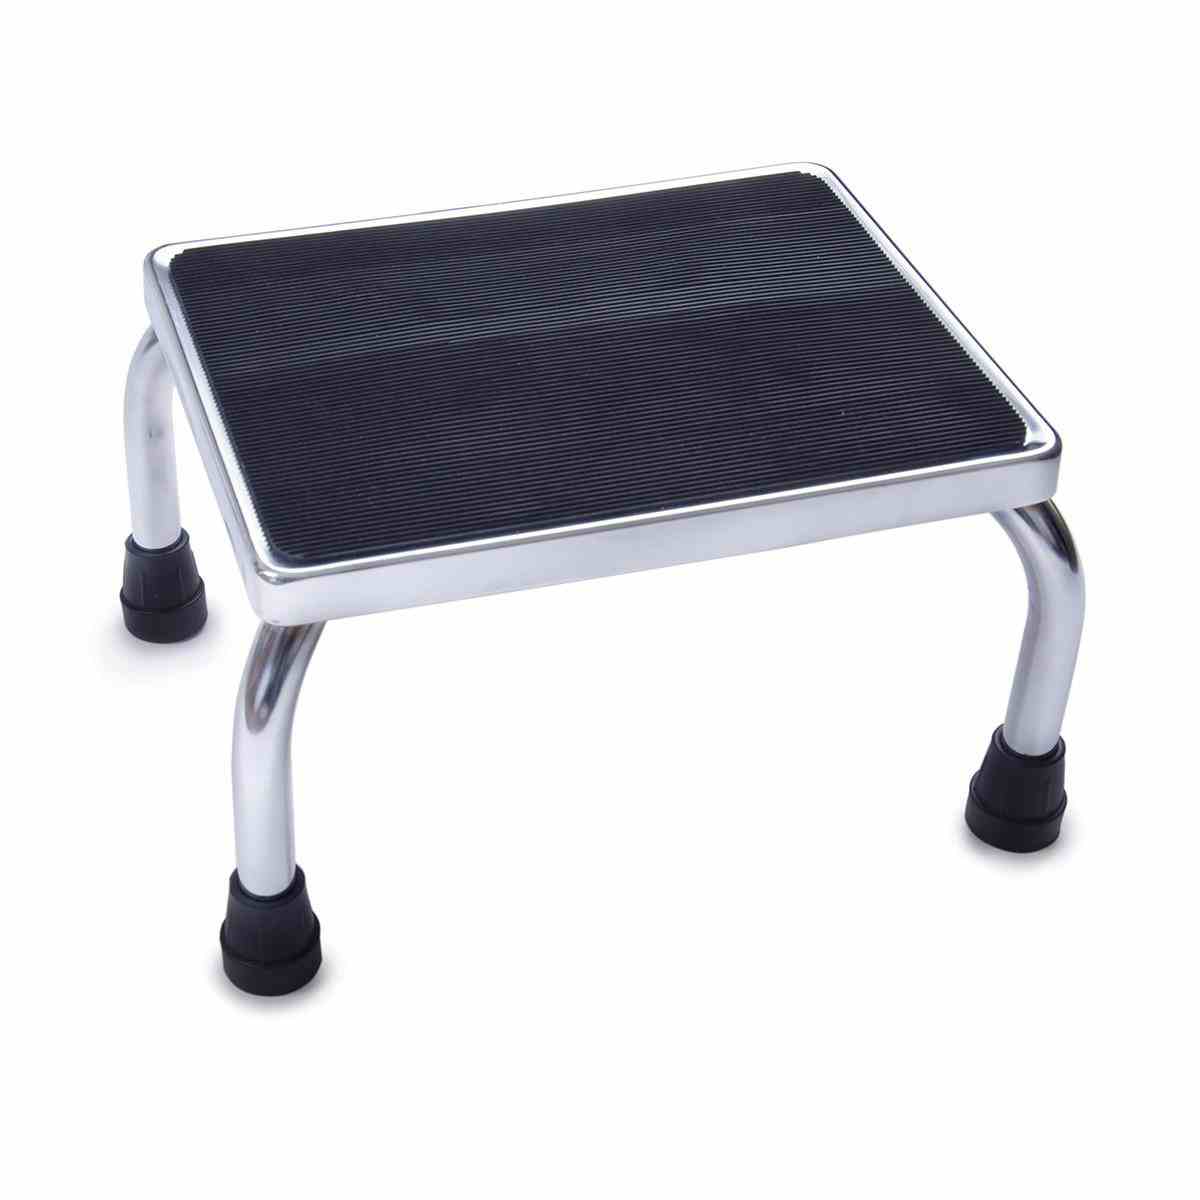 Medline Chrome Footstool with Rubber Mat, MDS80430I, 1 Each